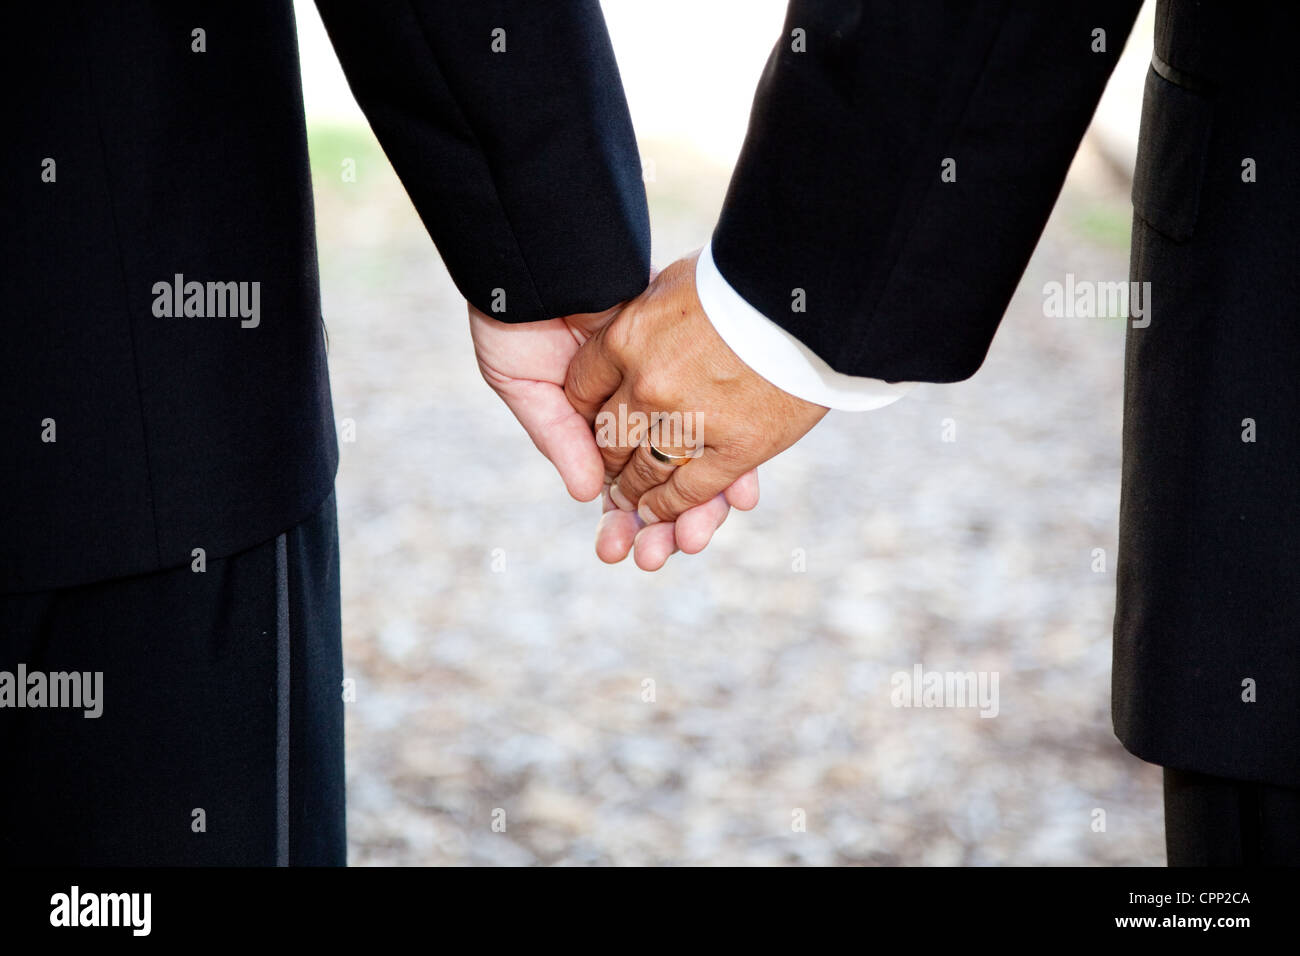 Closeup of a gay couple holding hands, wearing a wedding ring. Couple is a hispanic man and a caucasian man. Stock Photo